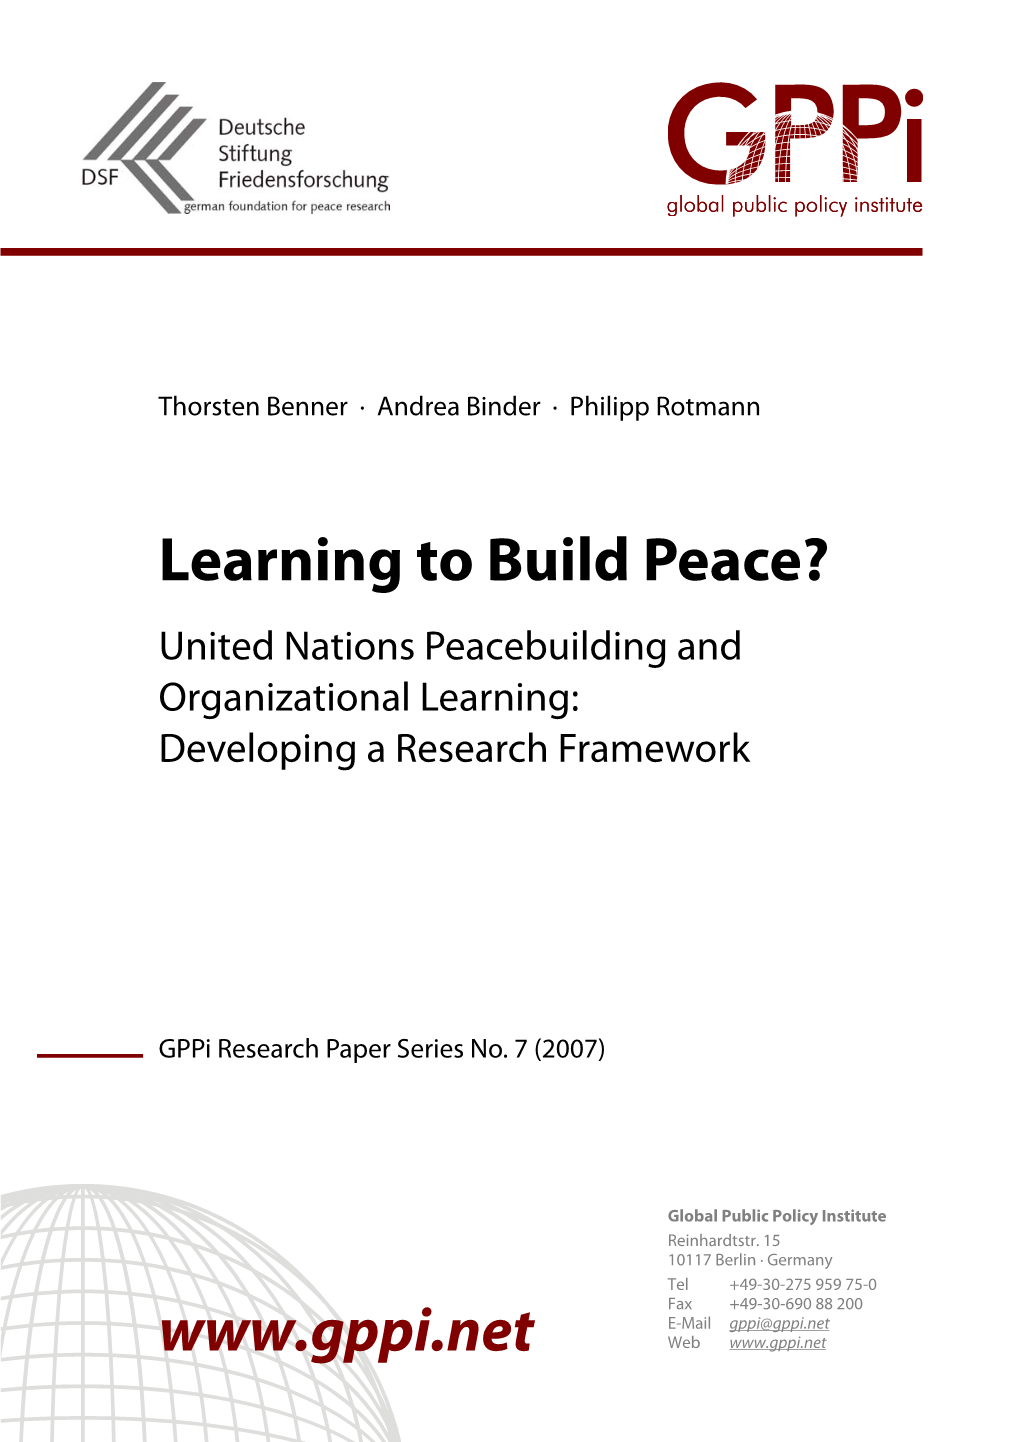 Learning to Build Peace? United Nations Peacebuilding and Organizational Learning: Developing a Research Framework